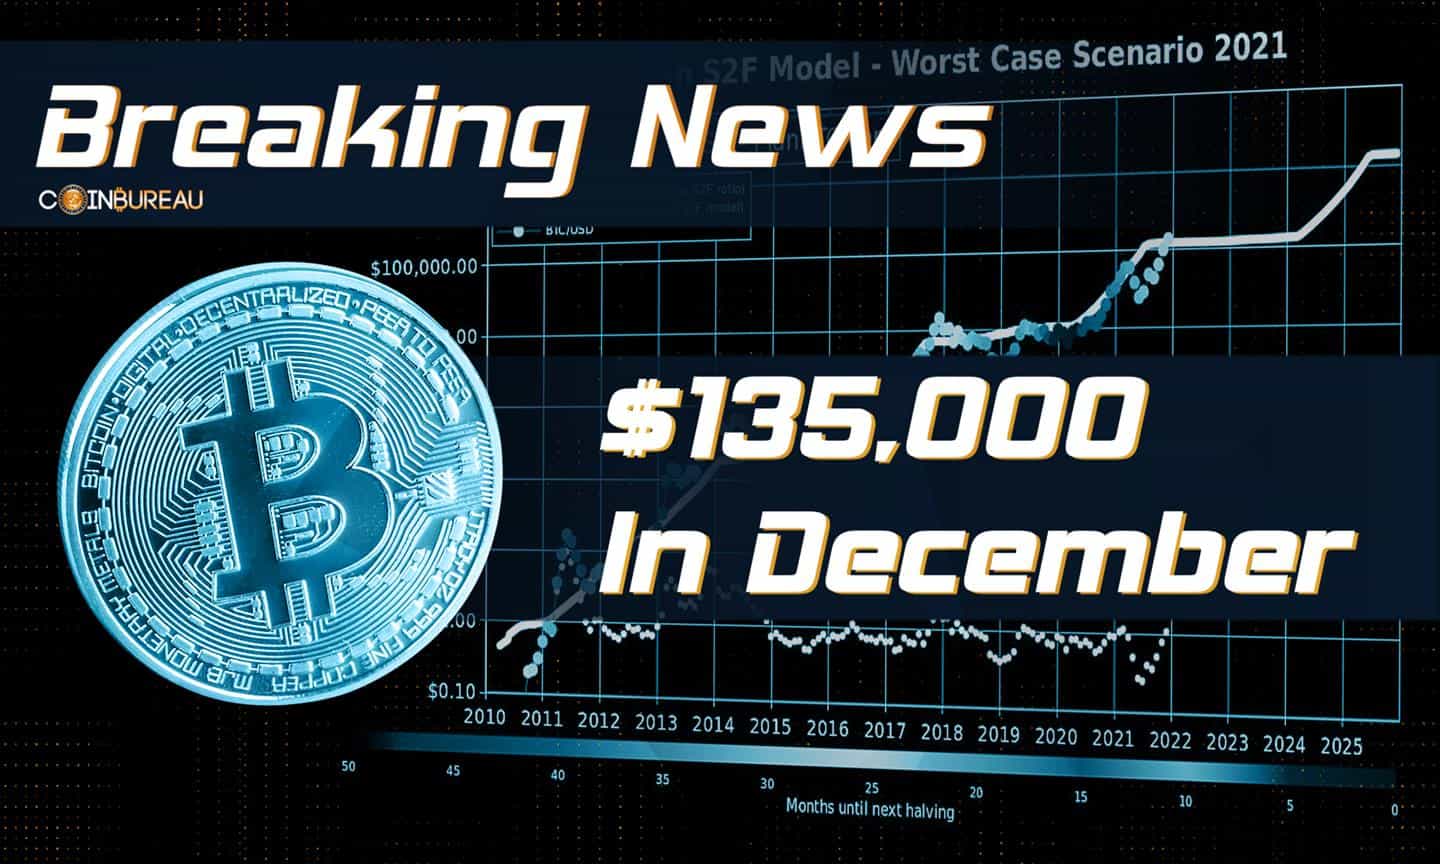 Bitcoin $135,000 In December? Crypto Analyst PlanB Gives An Update On Bull Market Projection